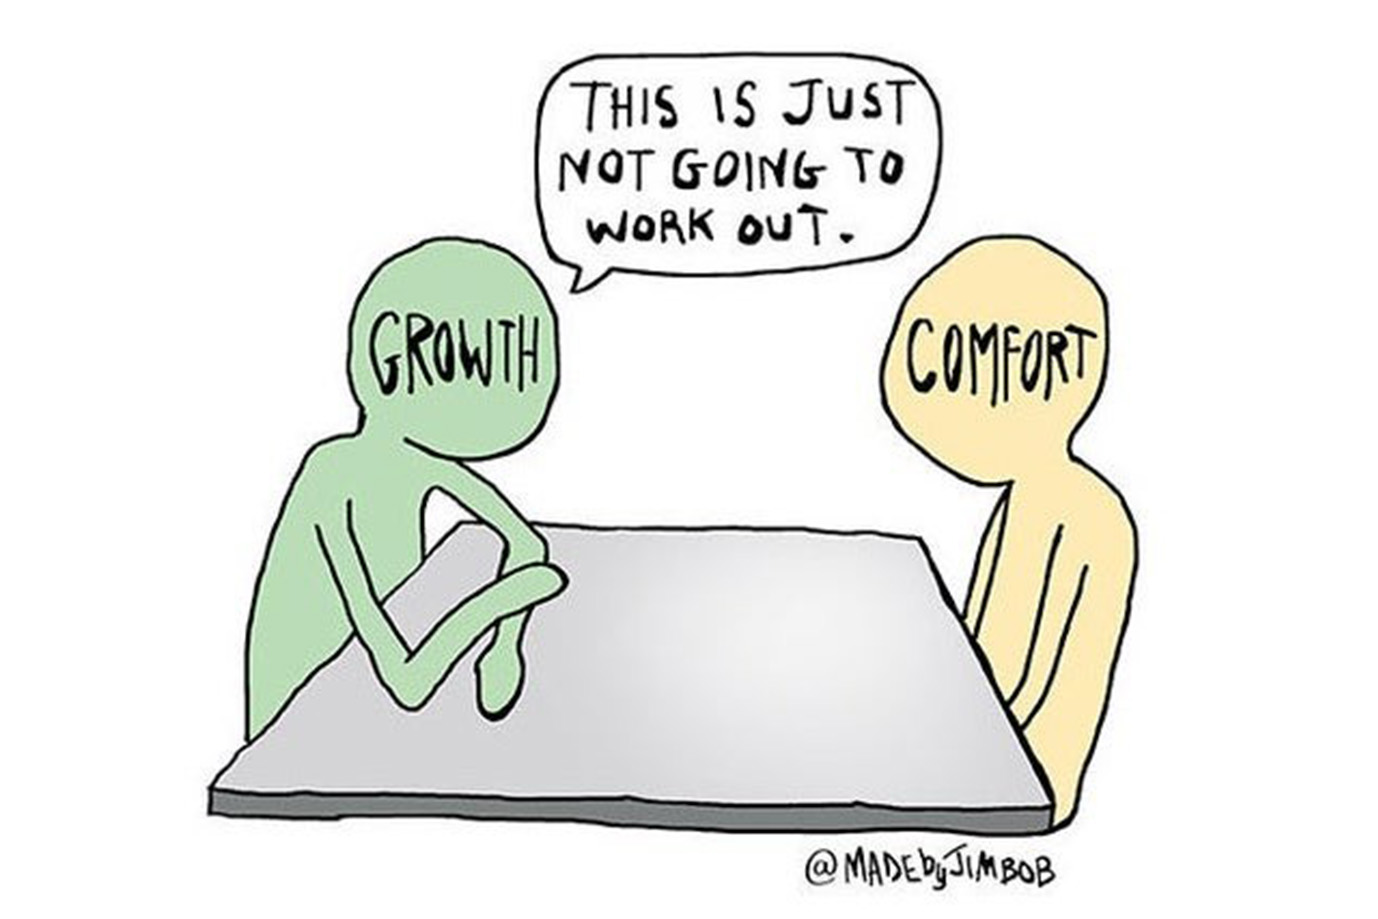 Comic style illustration. Growth and Comfort personified, sitting at a table across from each other. Growth leans over and says, "This is just not going to work out."